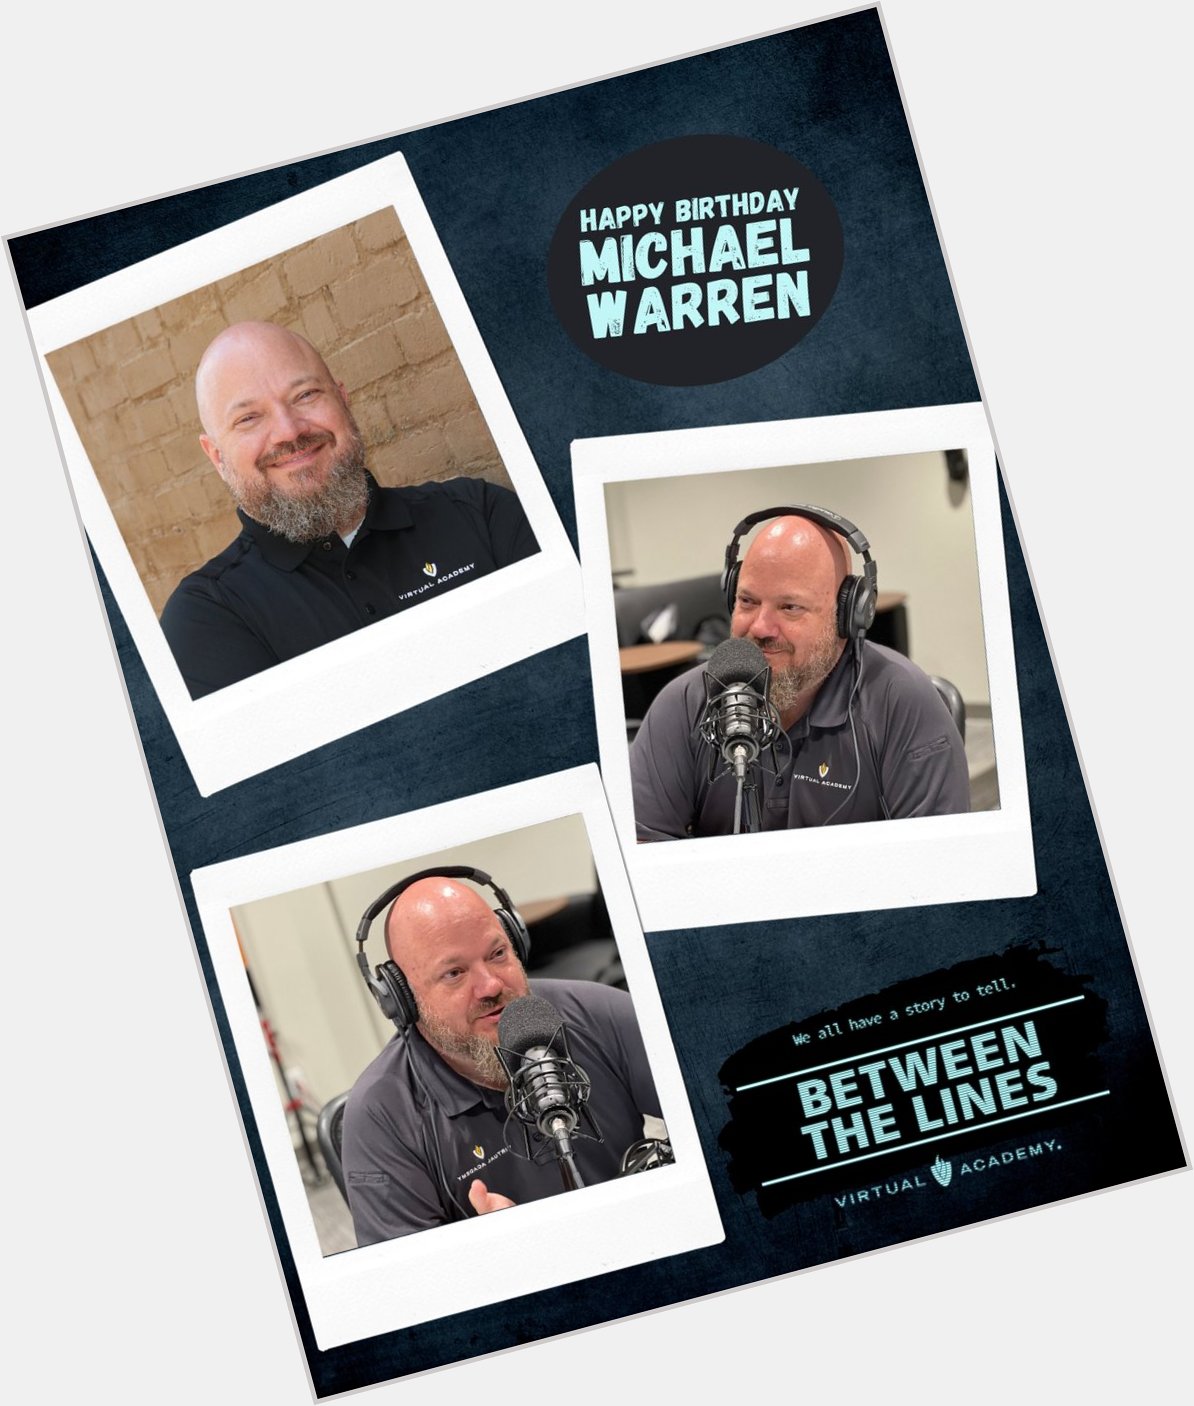 Wishing our host Michael Warren a very happy birthday today! 